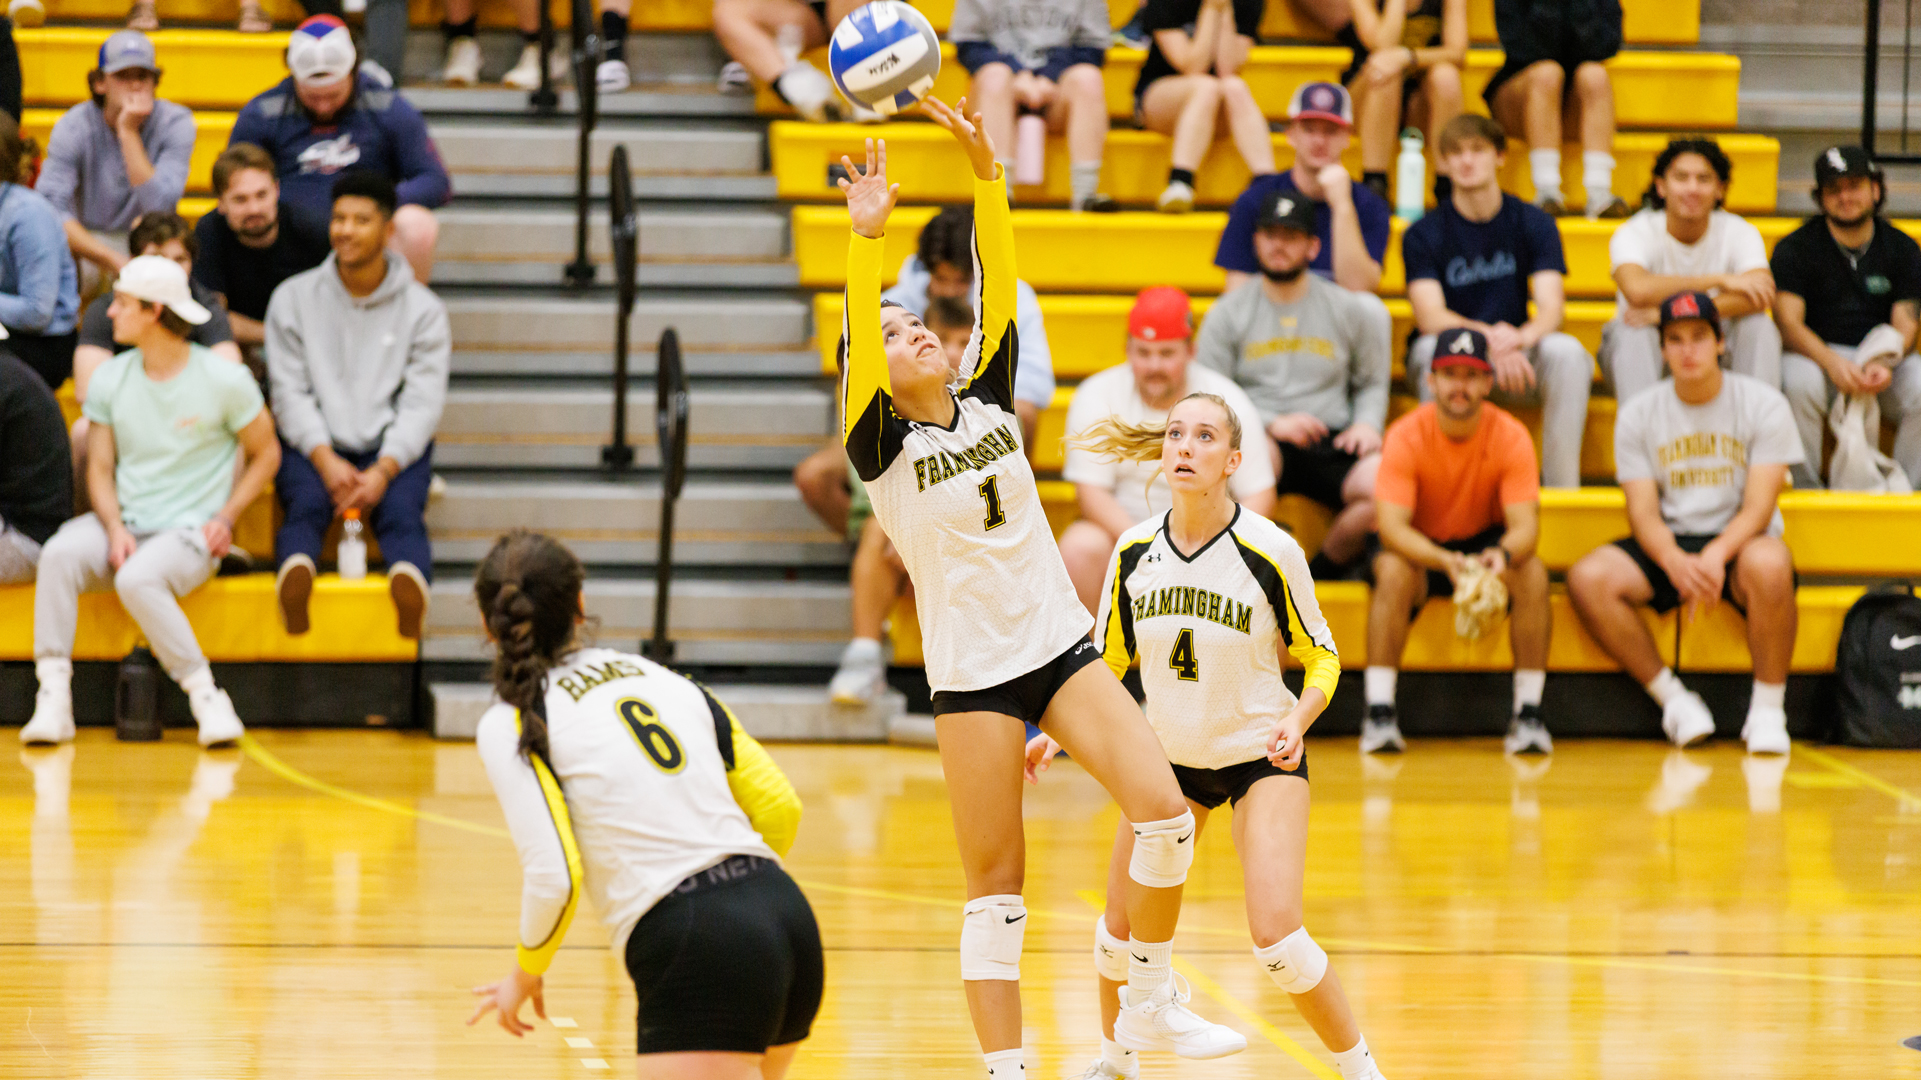 Volleyball Posts 3-1 Victory over Bridgewater State in MASCAC Clash